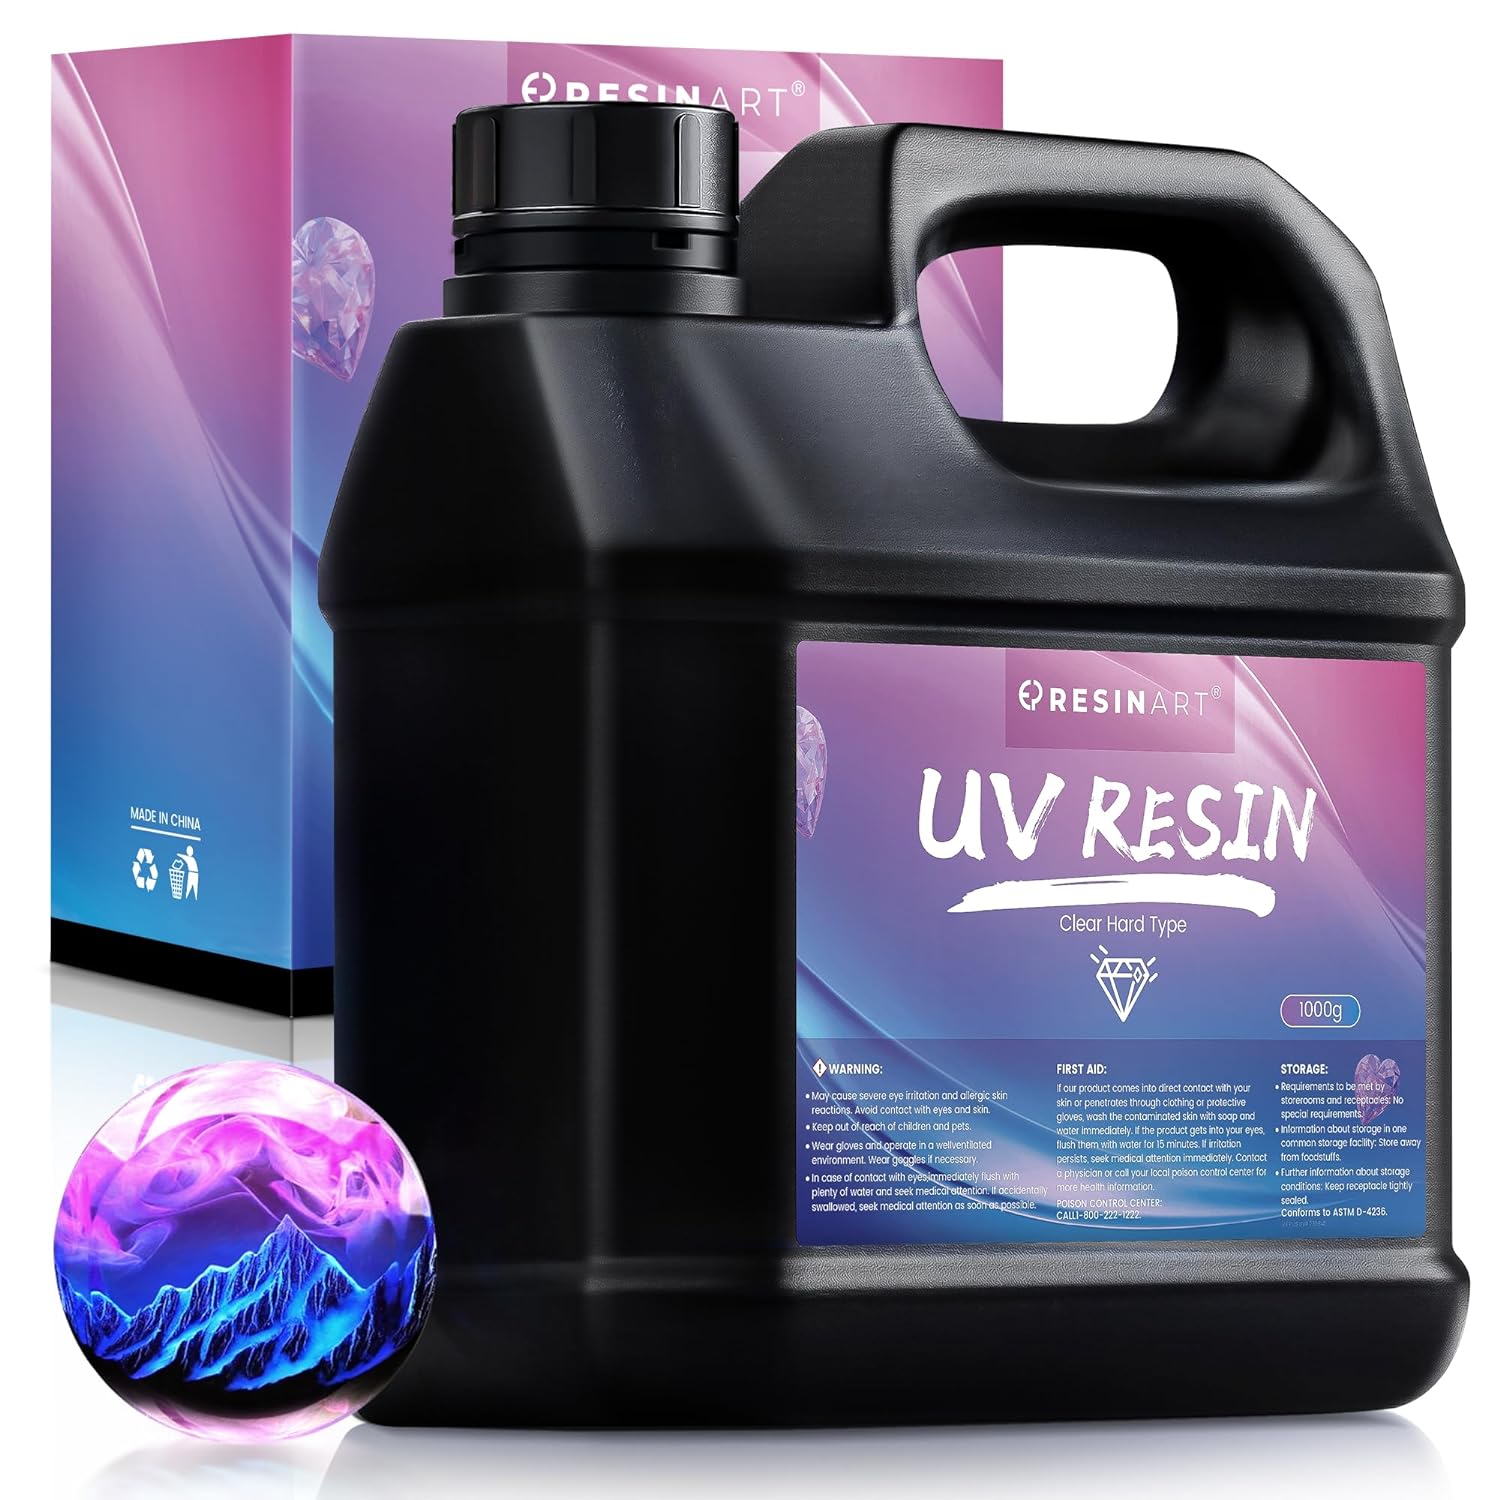  Bsrezn 1000g Bulk UV Resin Hard, Crystal Clear Large UV Cure  Epoxy Resin Kit Premixed Resina UV Transparent Solar Activated Glue for  Jewelry Making Fast Curing 1KG : Arts, Crafts 